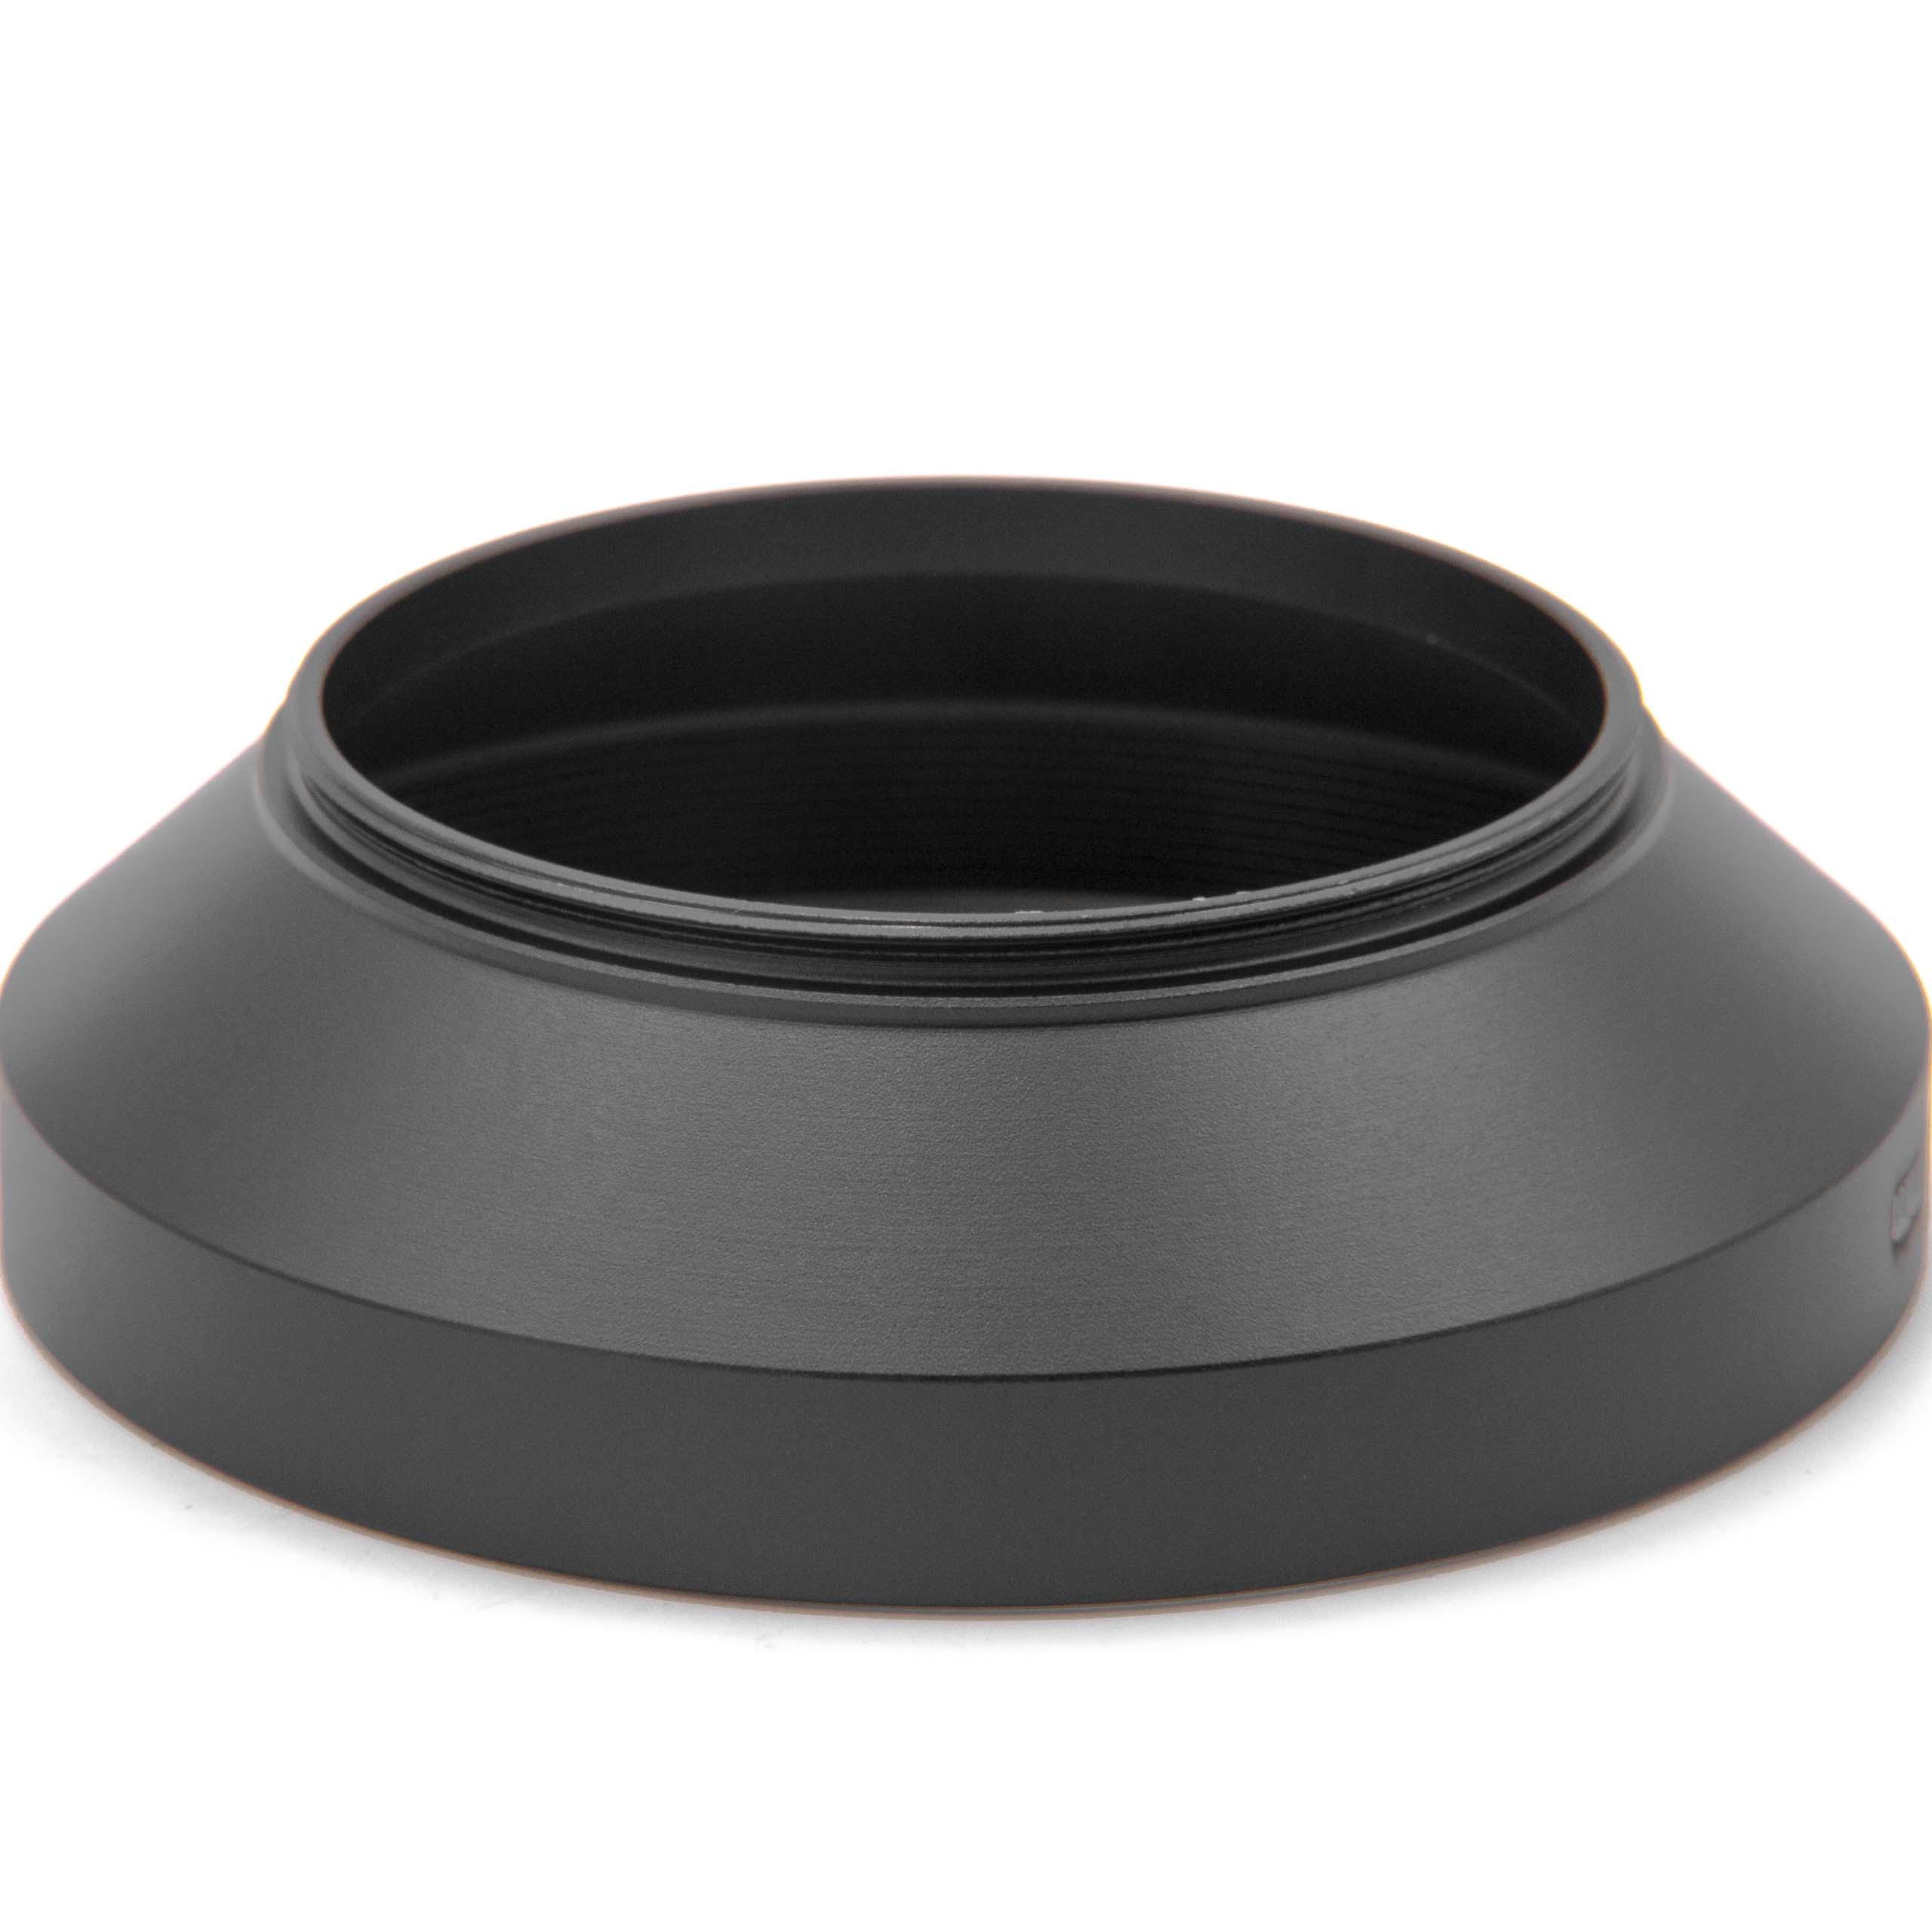 Lens Hood suitable for 52mm Lens - Wide-Angle Lens Shade Black, Round